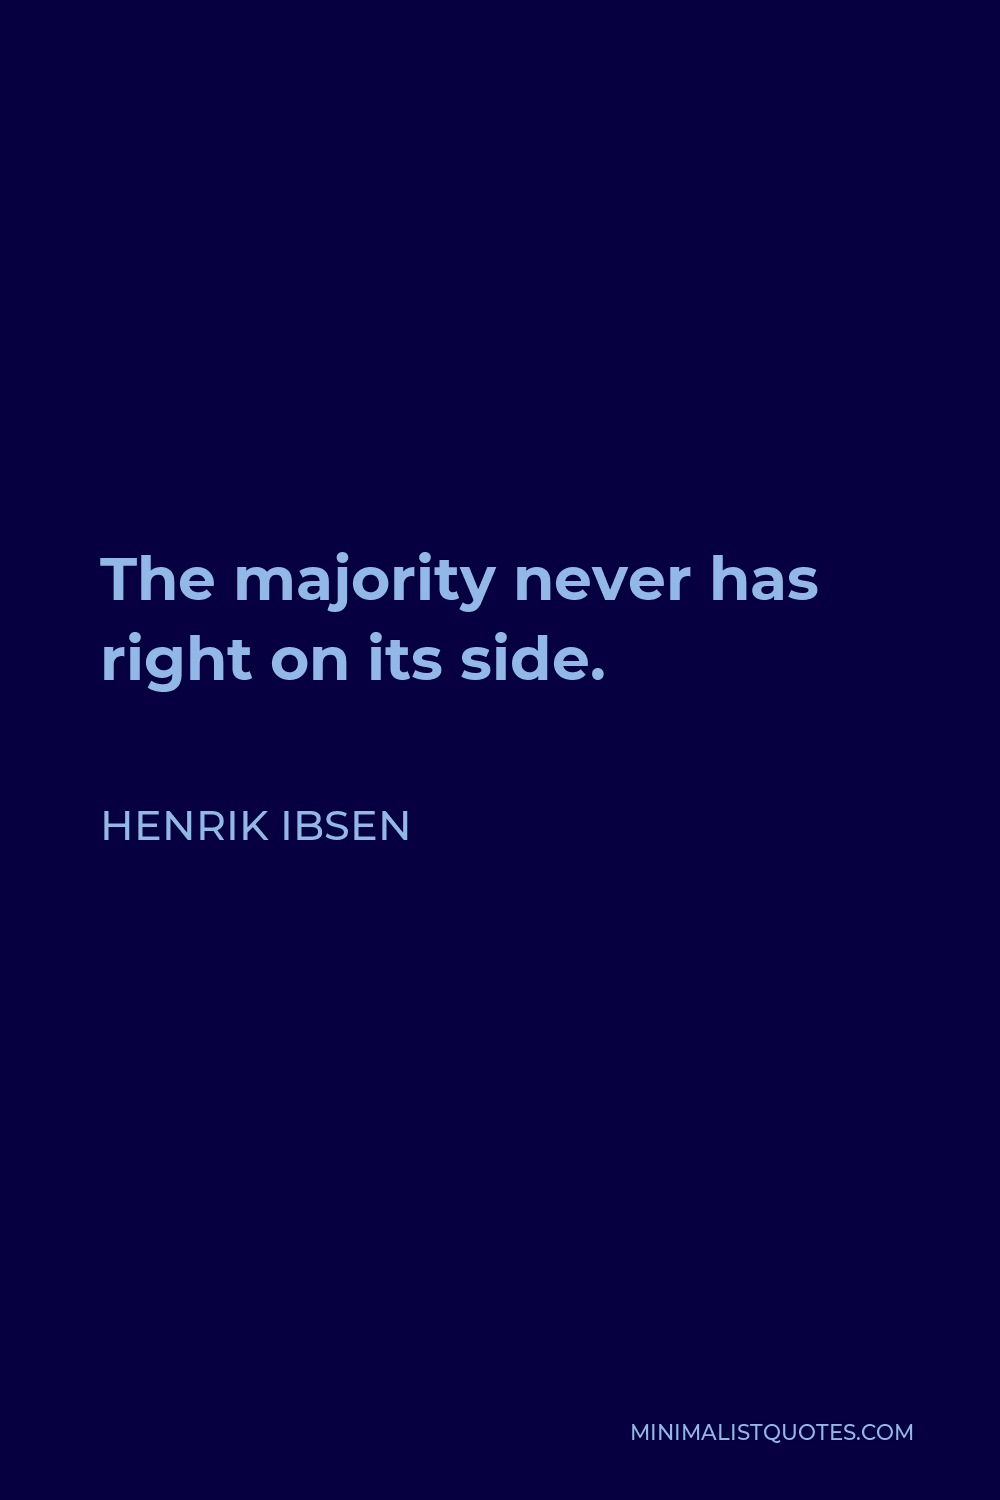 Henrik Ibsen Quote - The majority never has right on its side.